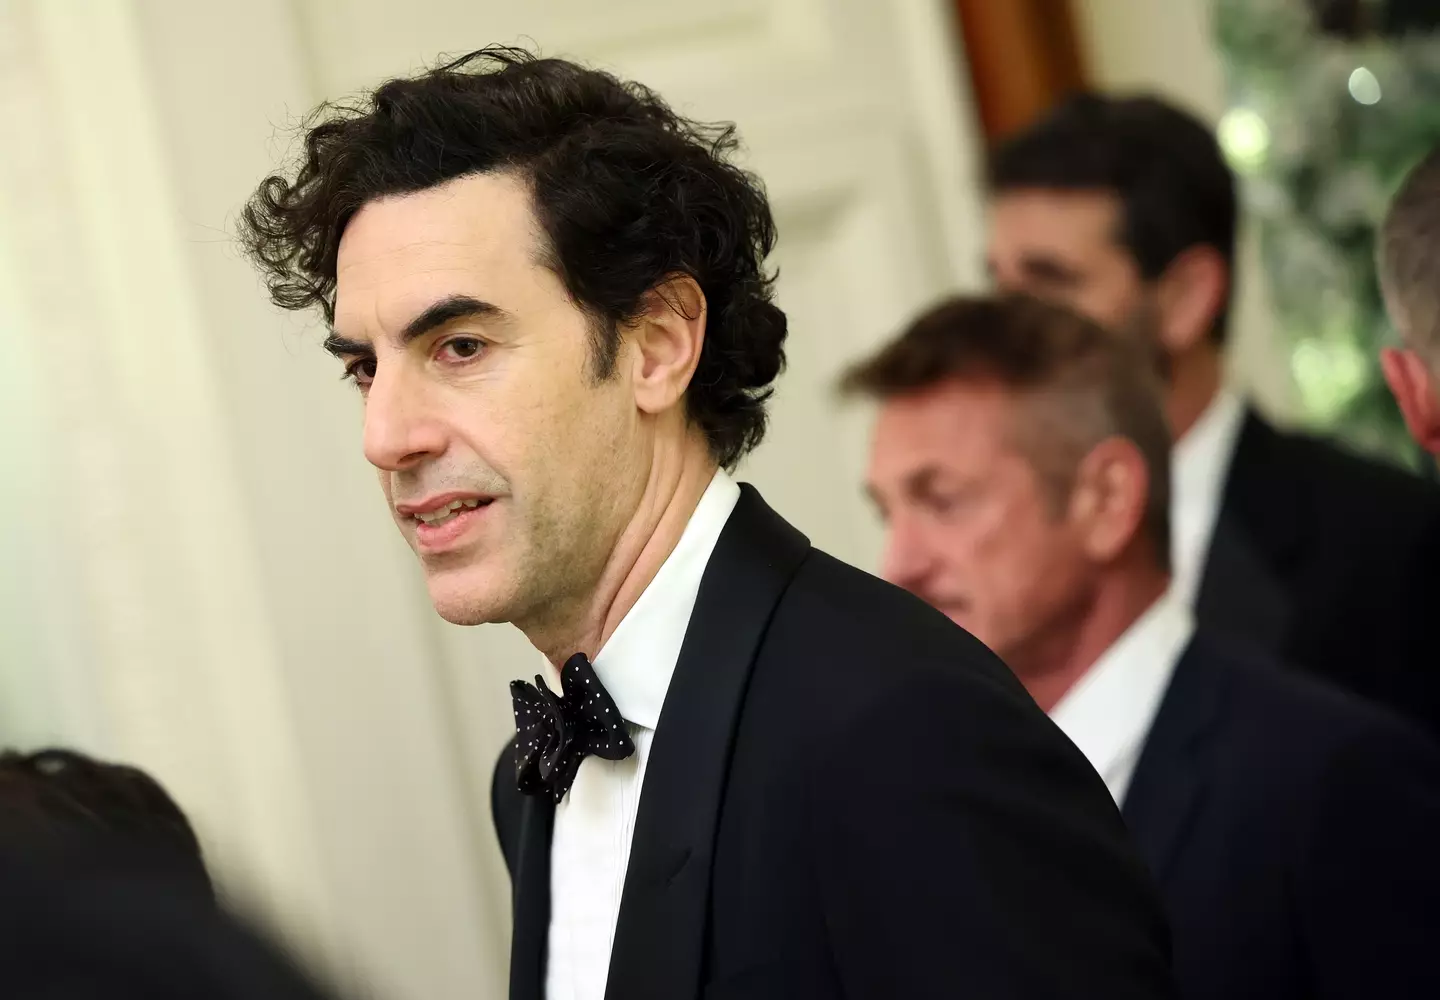 Baron Cohen has denied all accusations. (Kevin Dietsch/Getty Images)